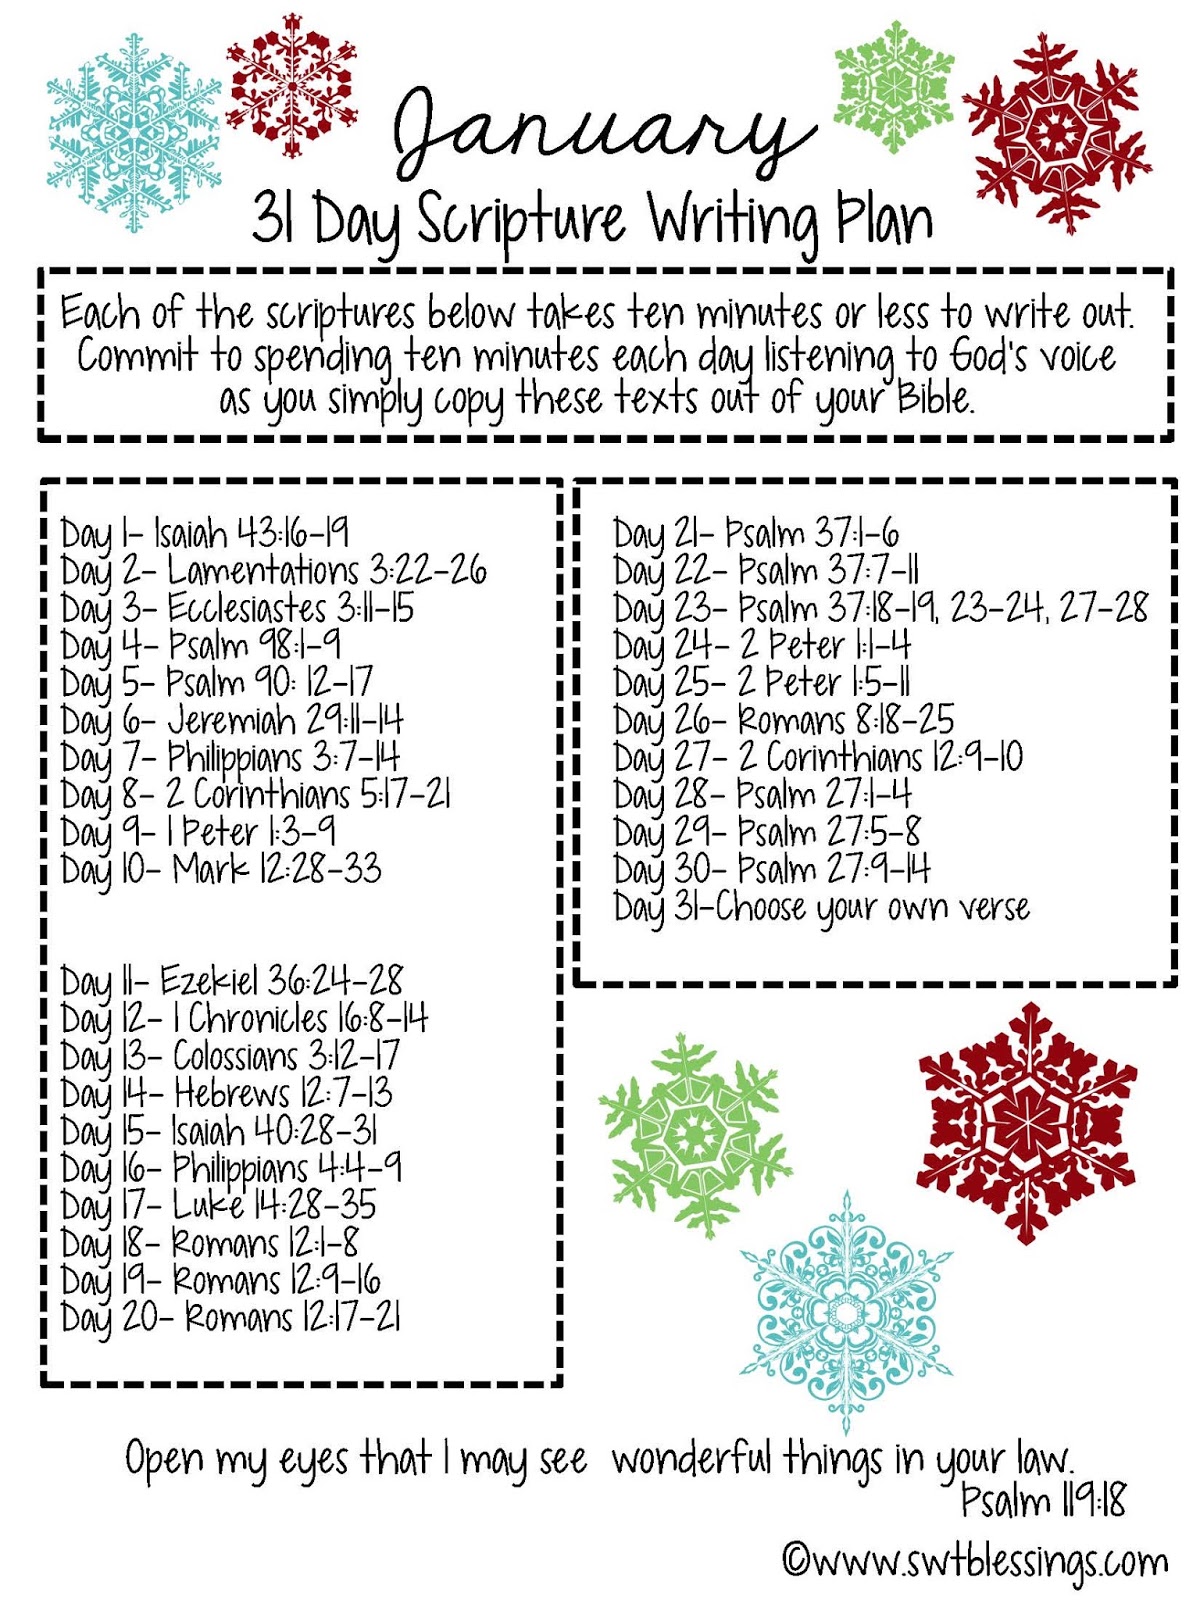 Sweet Blessings: January Scripture Writing Plan: Courage